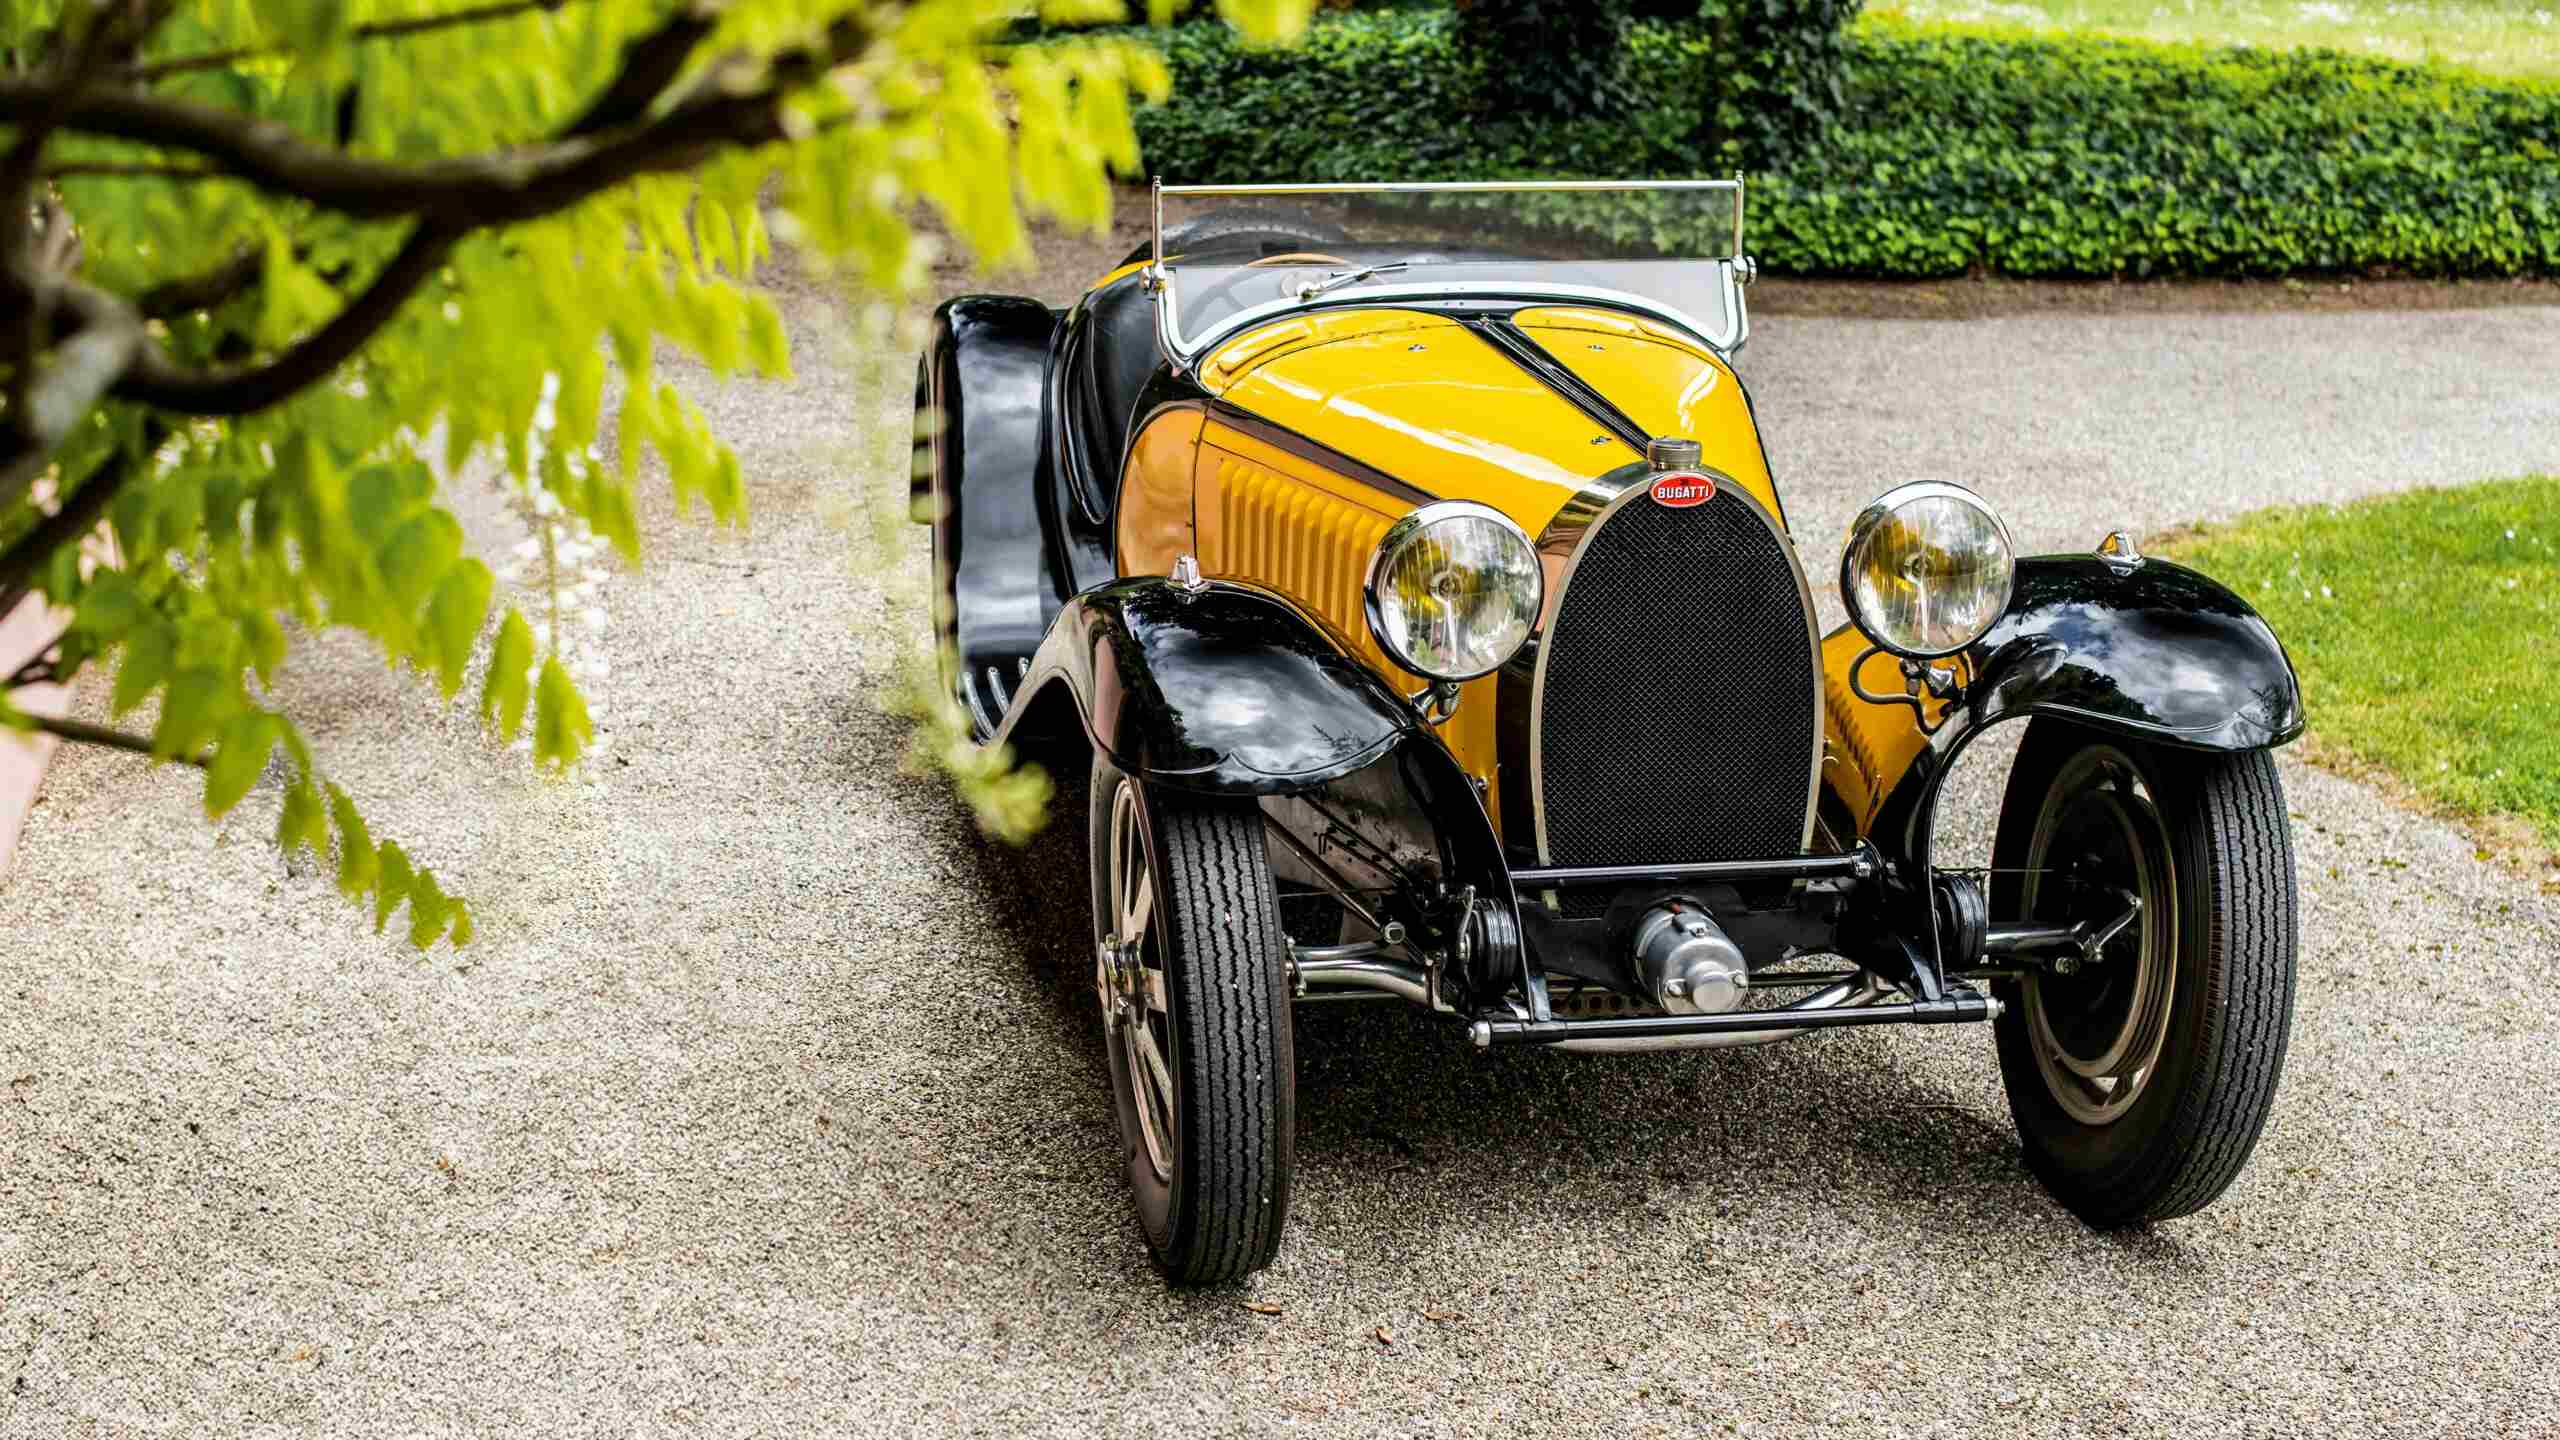 A Bugatti Type 55 Super Sport With A Black And Yellow Exterior Shade